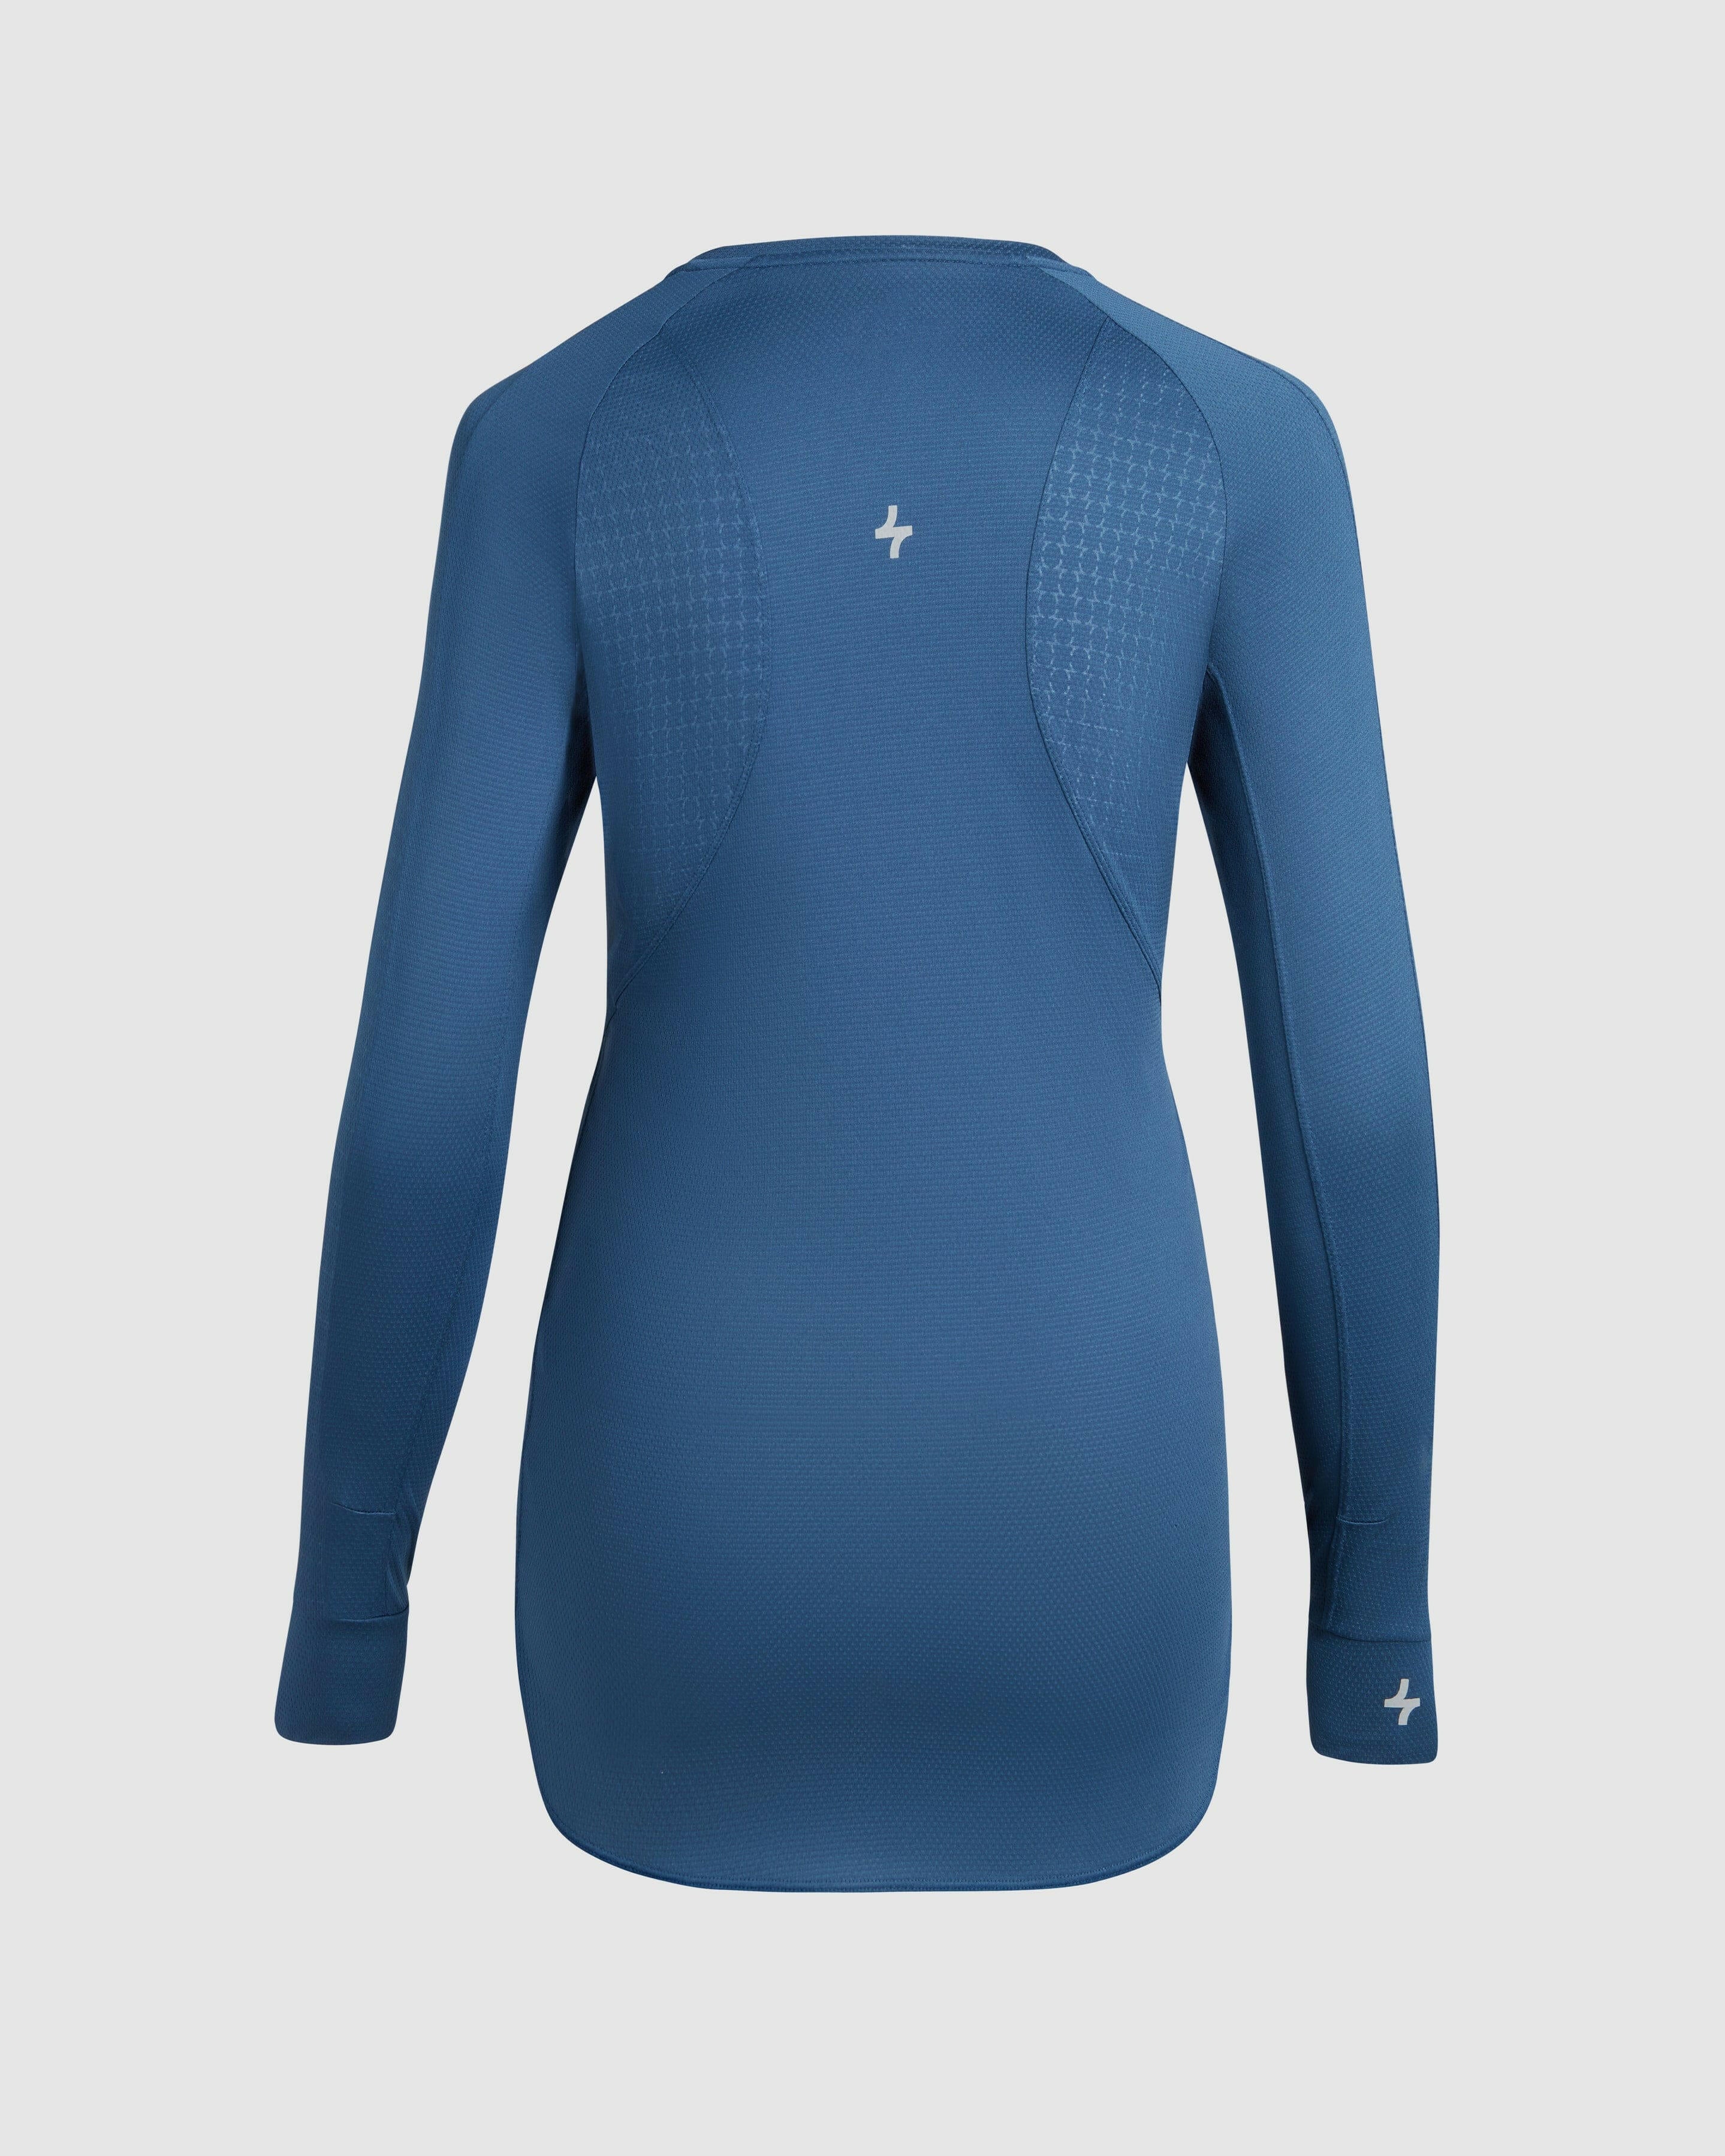 Close-up view of Qynda ACT LONG SLEEVE T-SHIRT, Dark Denim color with breathable mesh panels on the back, perfect for your sports wardrobe.